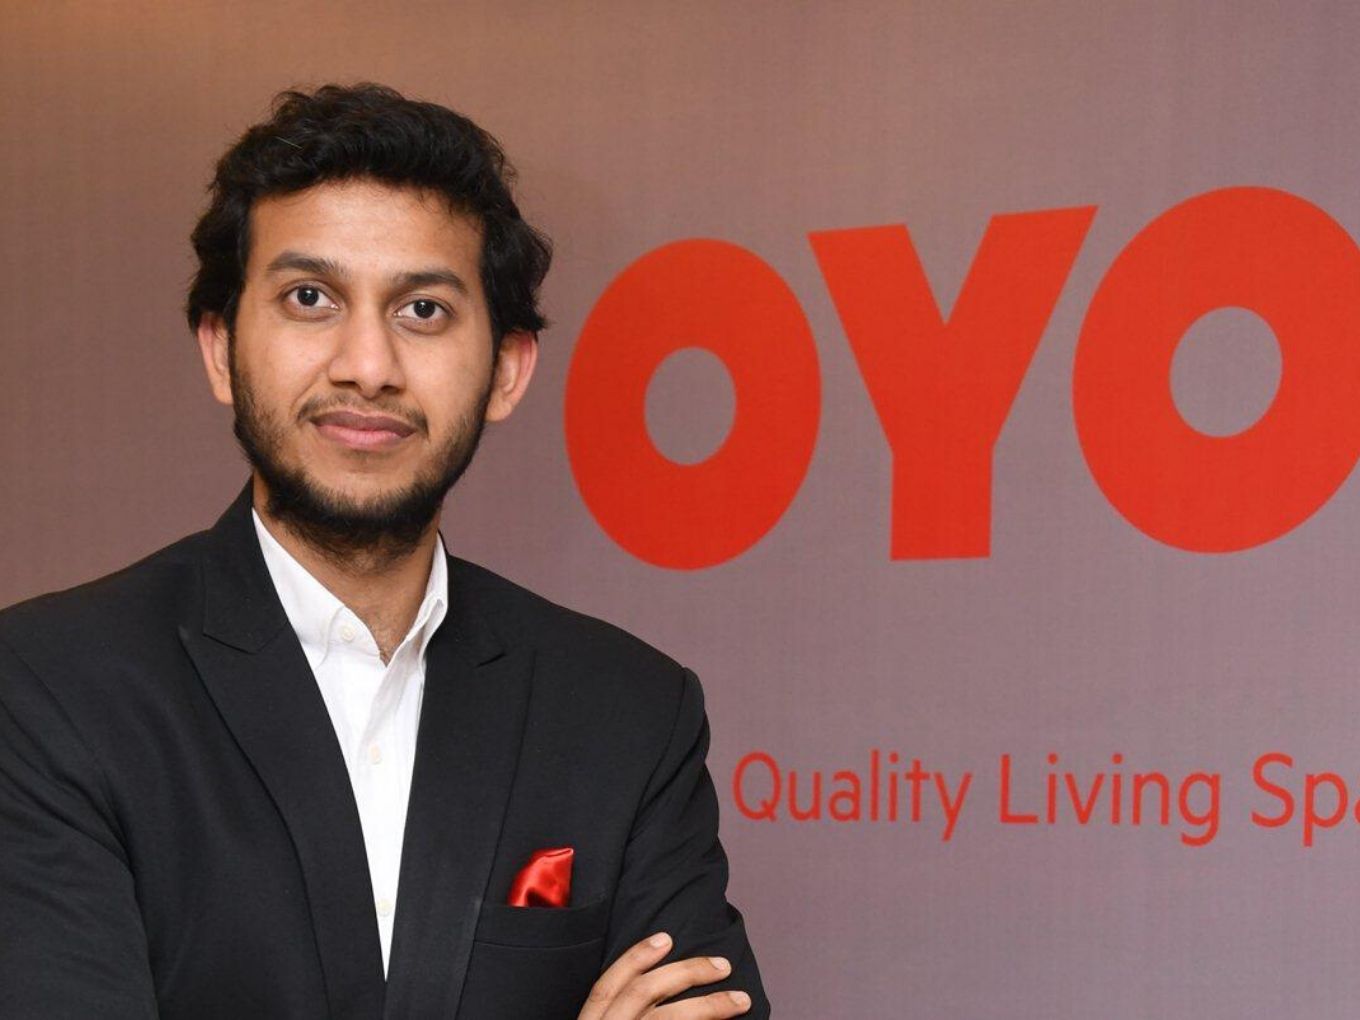 Oyo Founder Ritesh Agarwal Breaks Silence On Hotel Protests